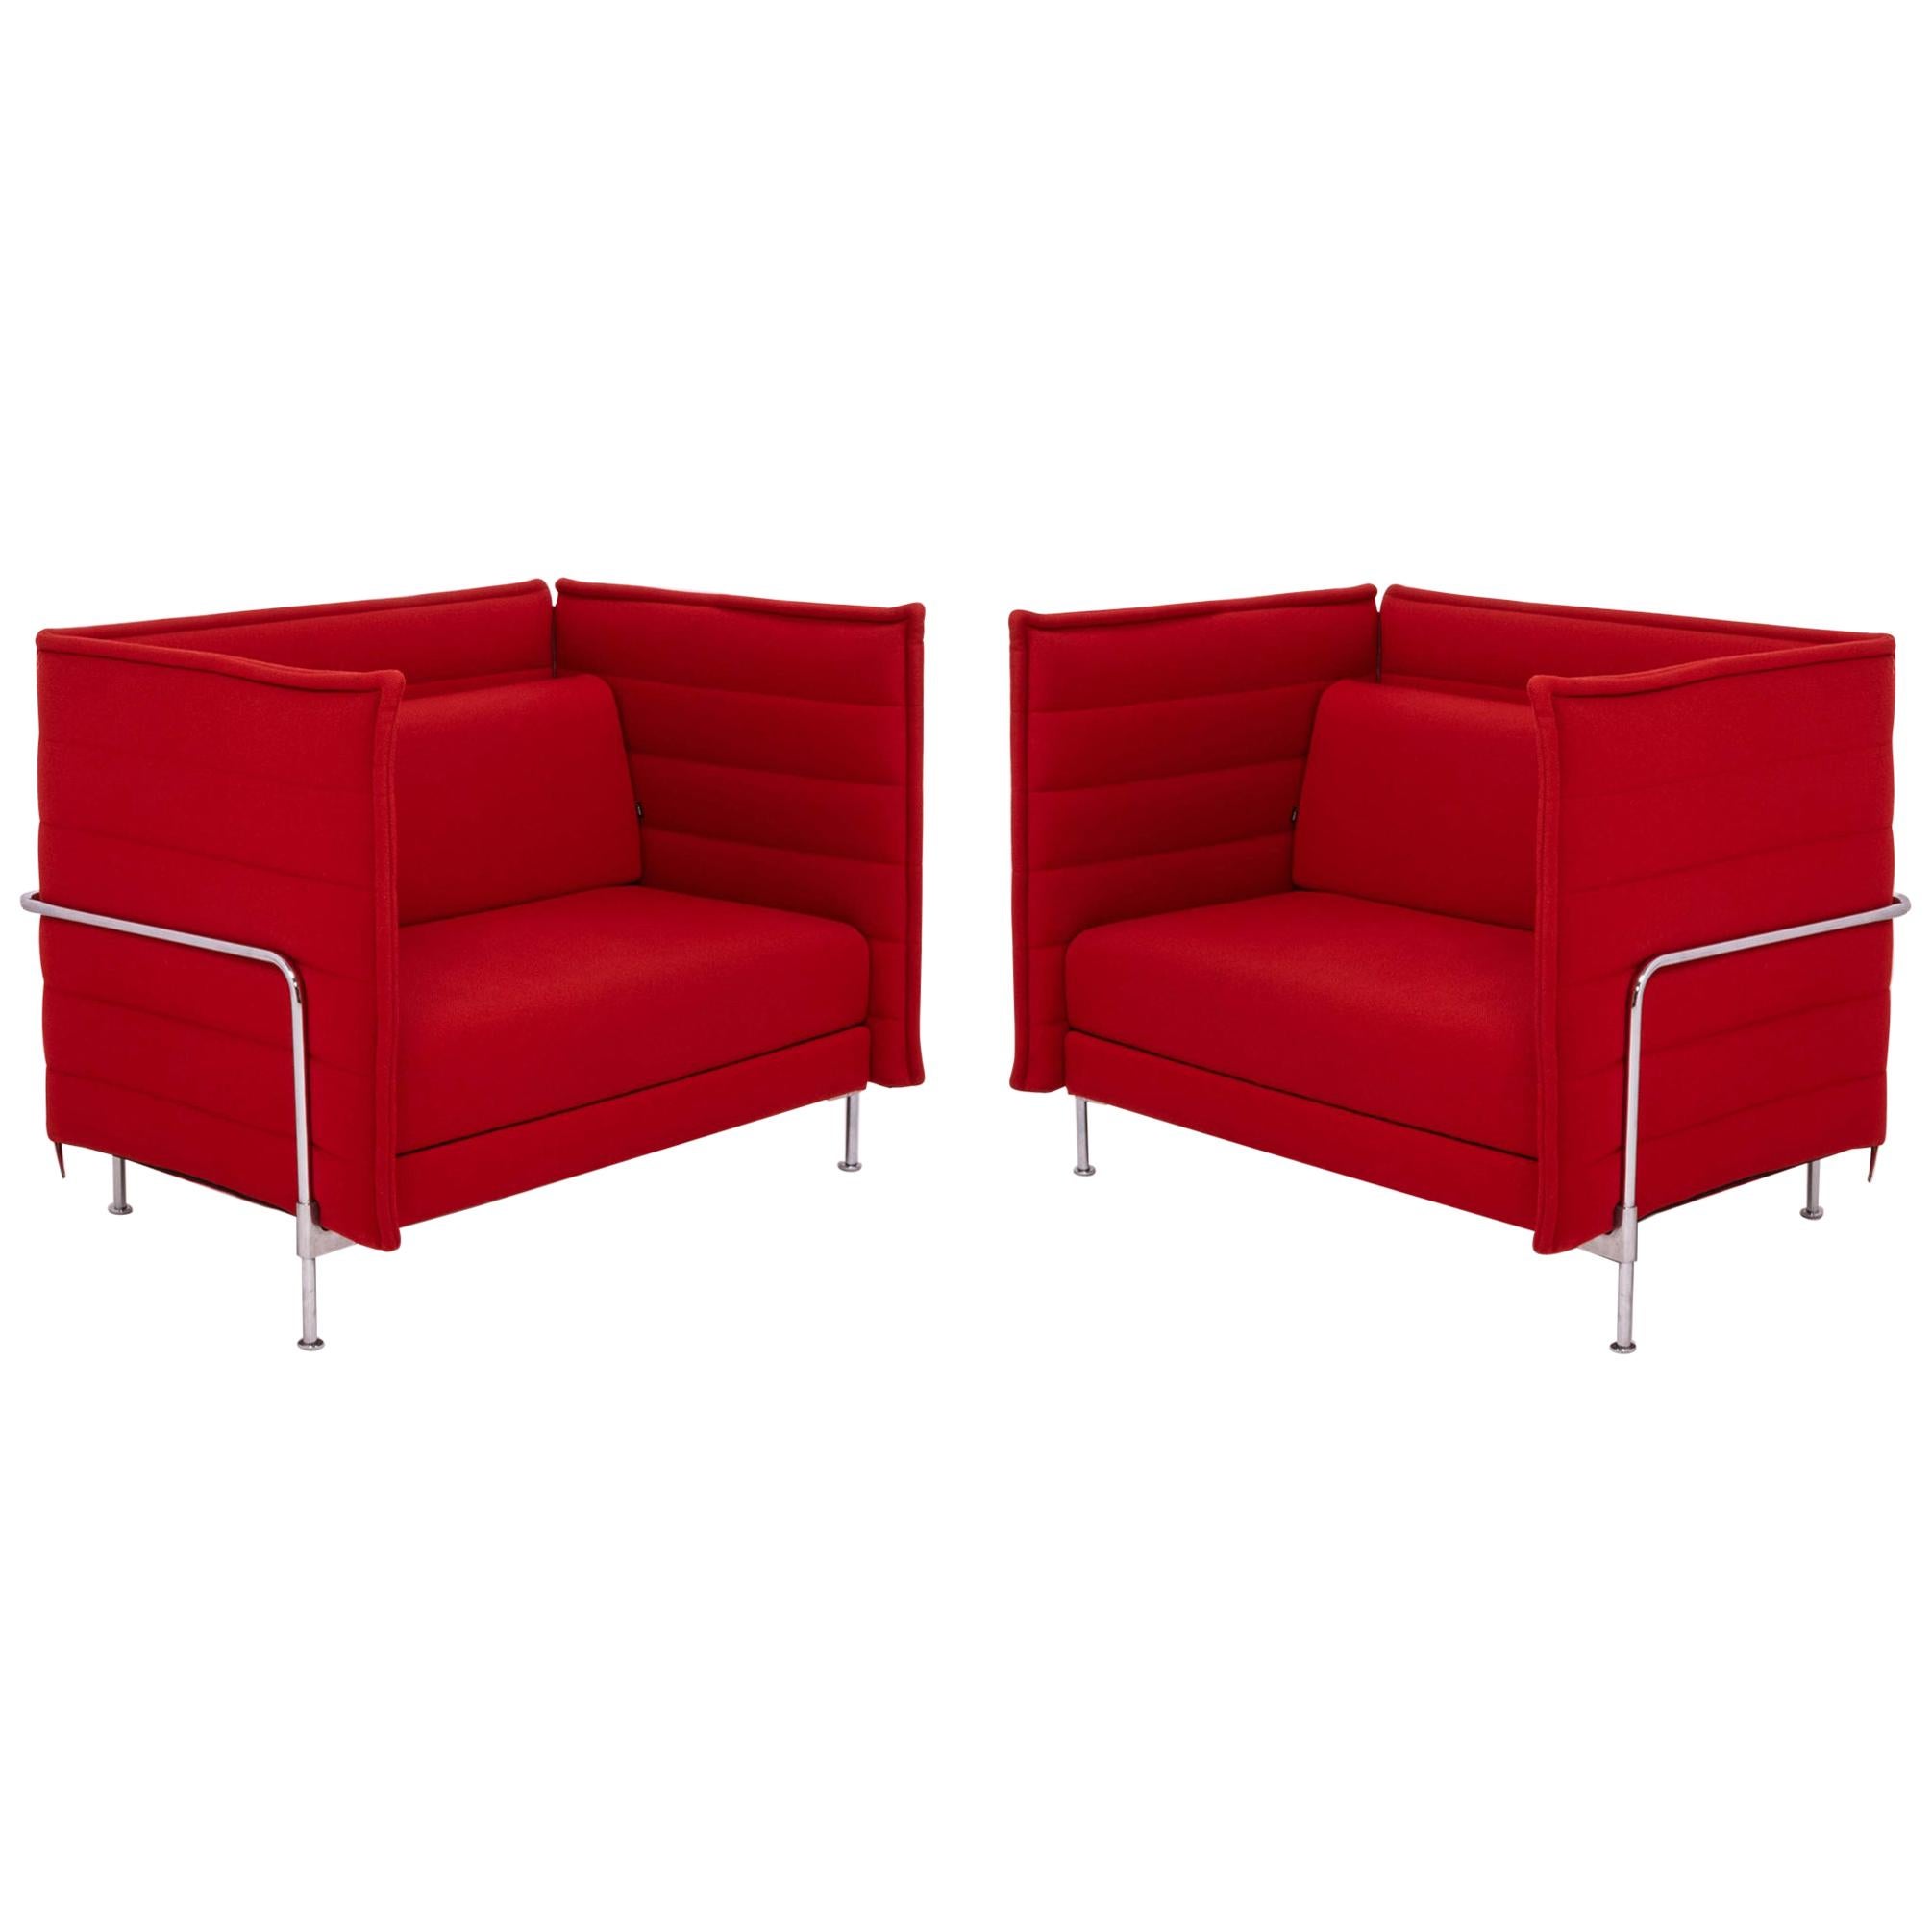 Alcove Red Loveseat Sofa by Ronan & Erwan Bouroullec for Vitra, Set of 2